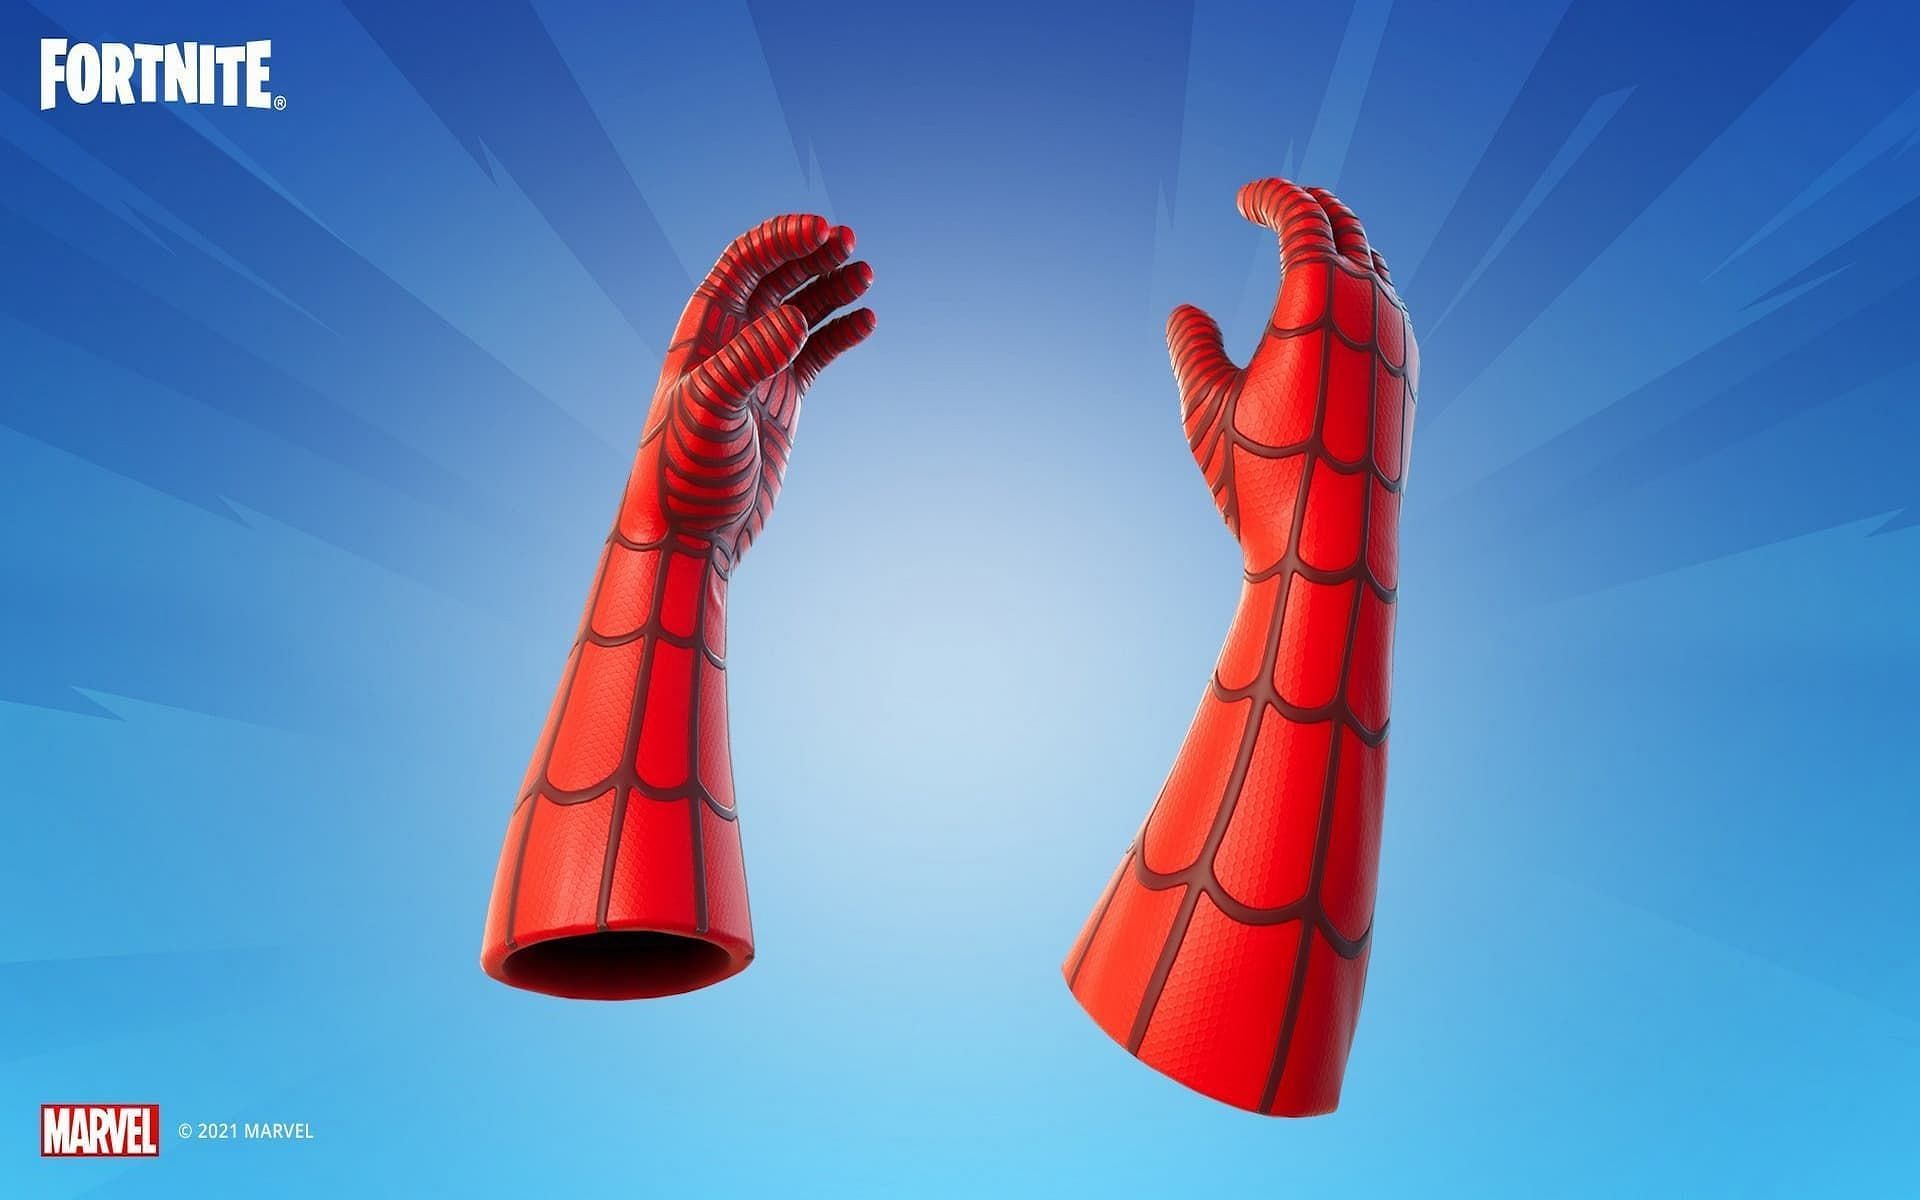 The Web-Shooters were a very popular means of transportation in Fortnite (Image via Epic Games)